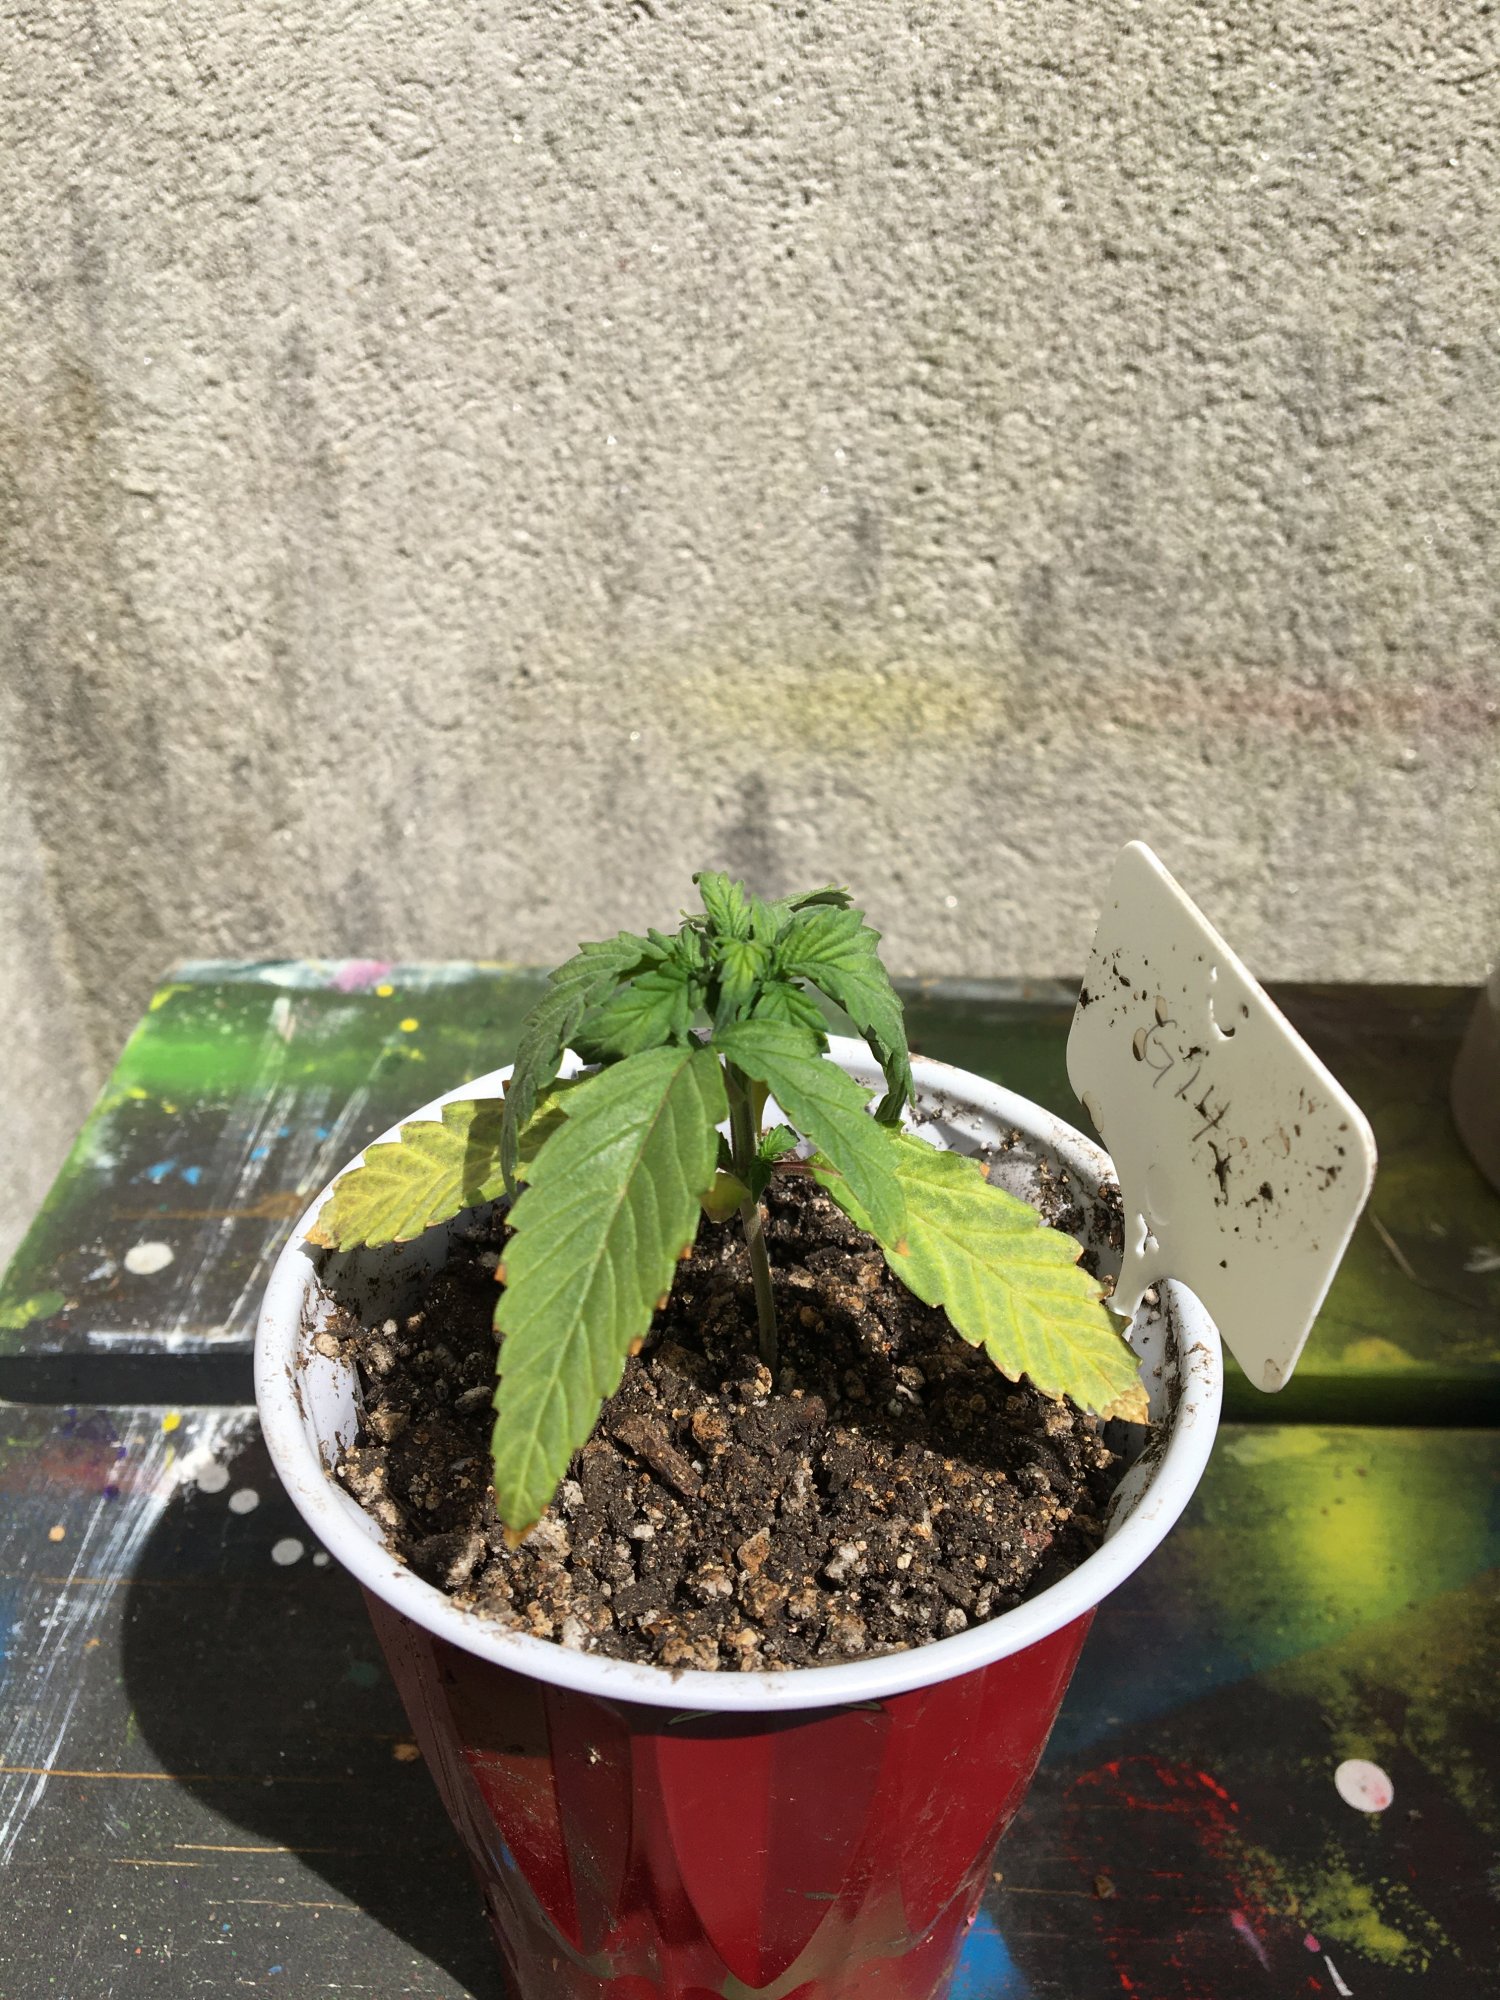 Leaf curling and yellowing issues on seedlings 4